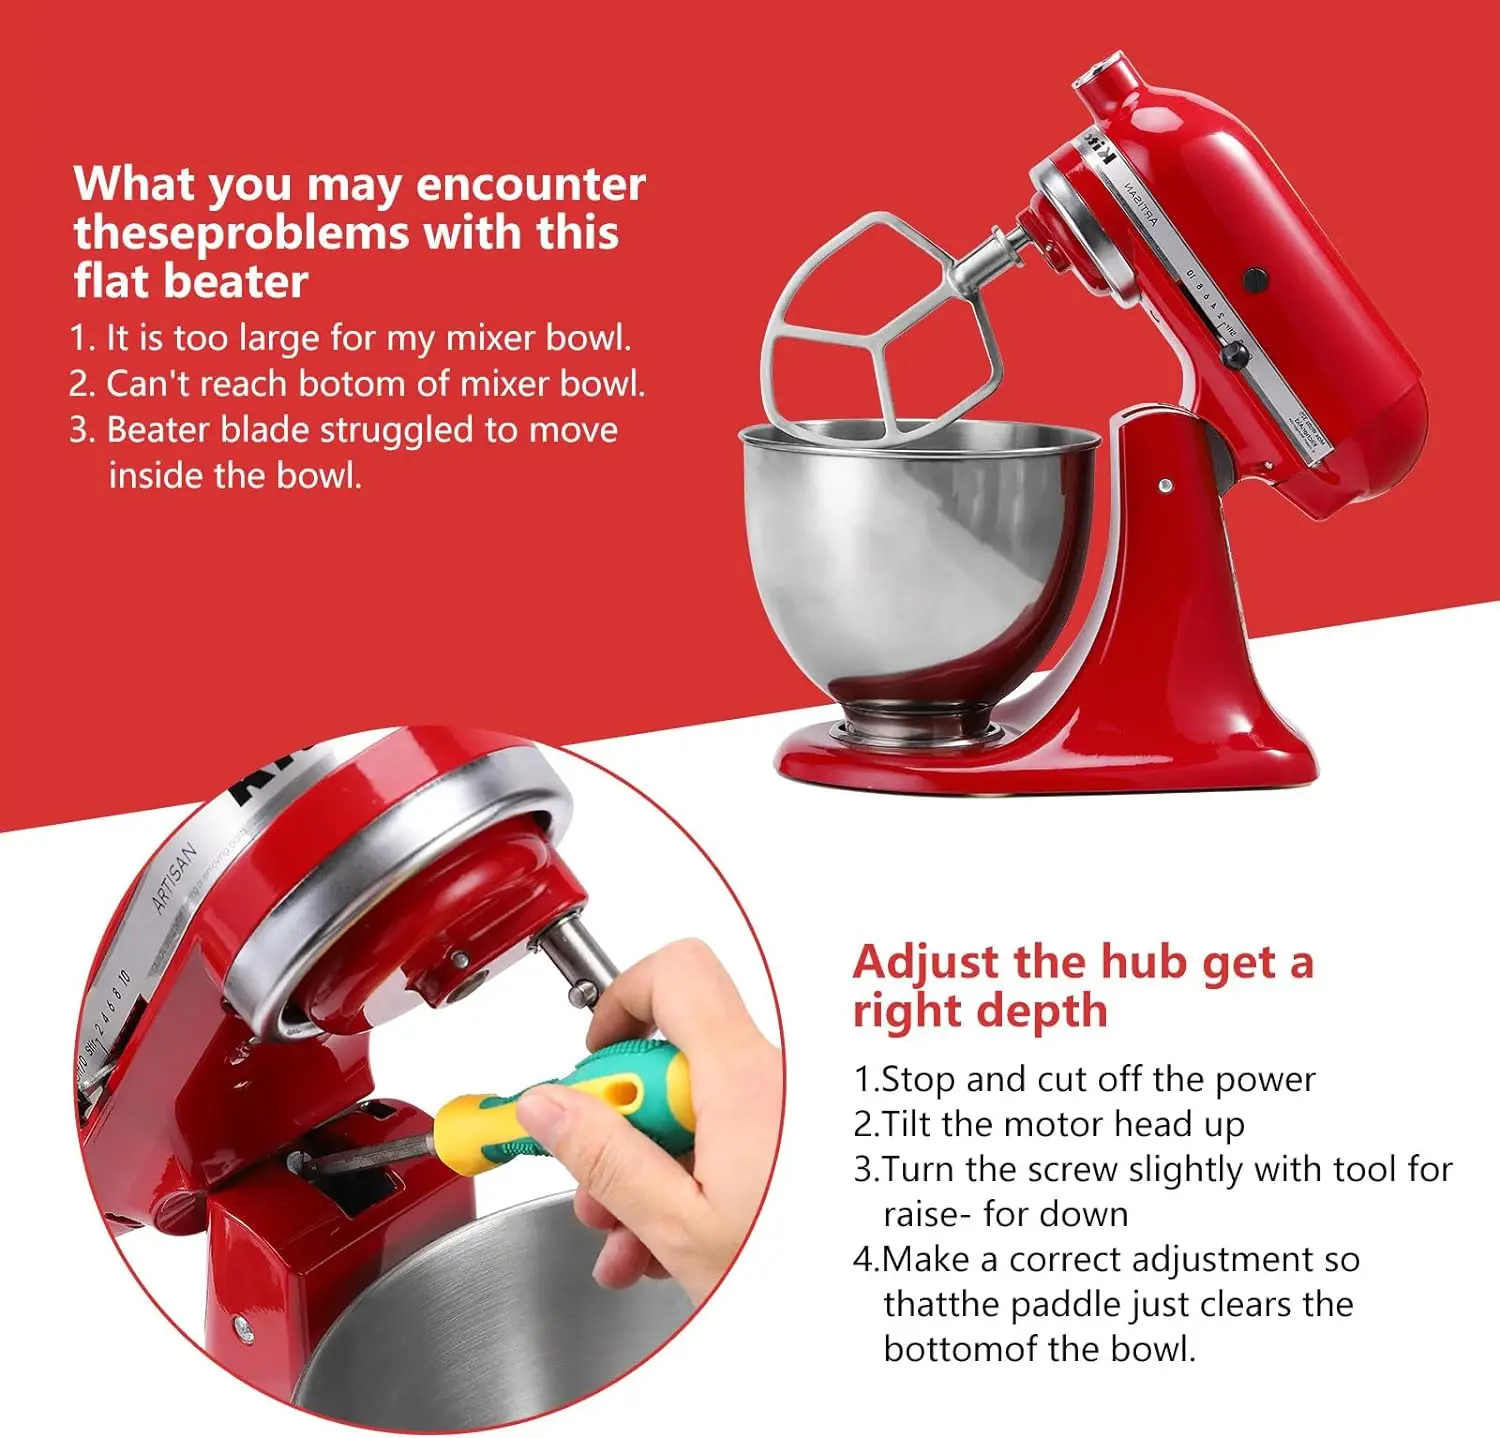 https://ae01.alicdn.com/kf/S9c6e76e95c584e238be1e8dc7caa6fcbN/Dishwasher-5-5-6QT-Stainless-Steel-Flat-Beater-for-KitchenAid-Stand-Mixer-Kitchen-Aid-Paddle-Attachment.jpg